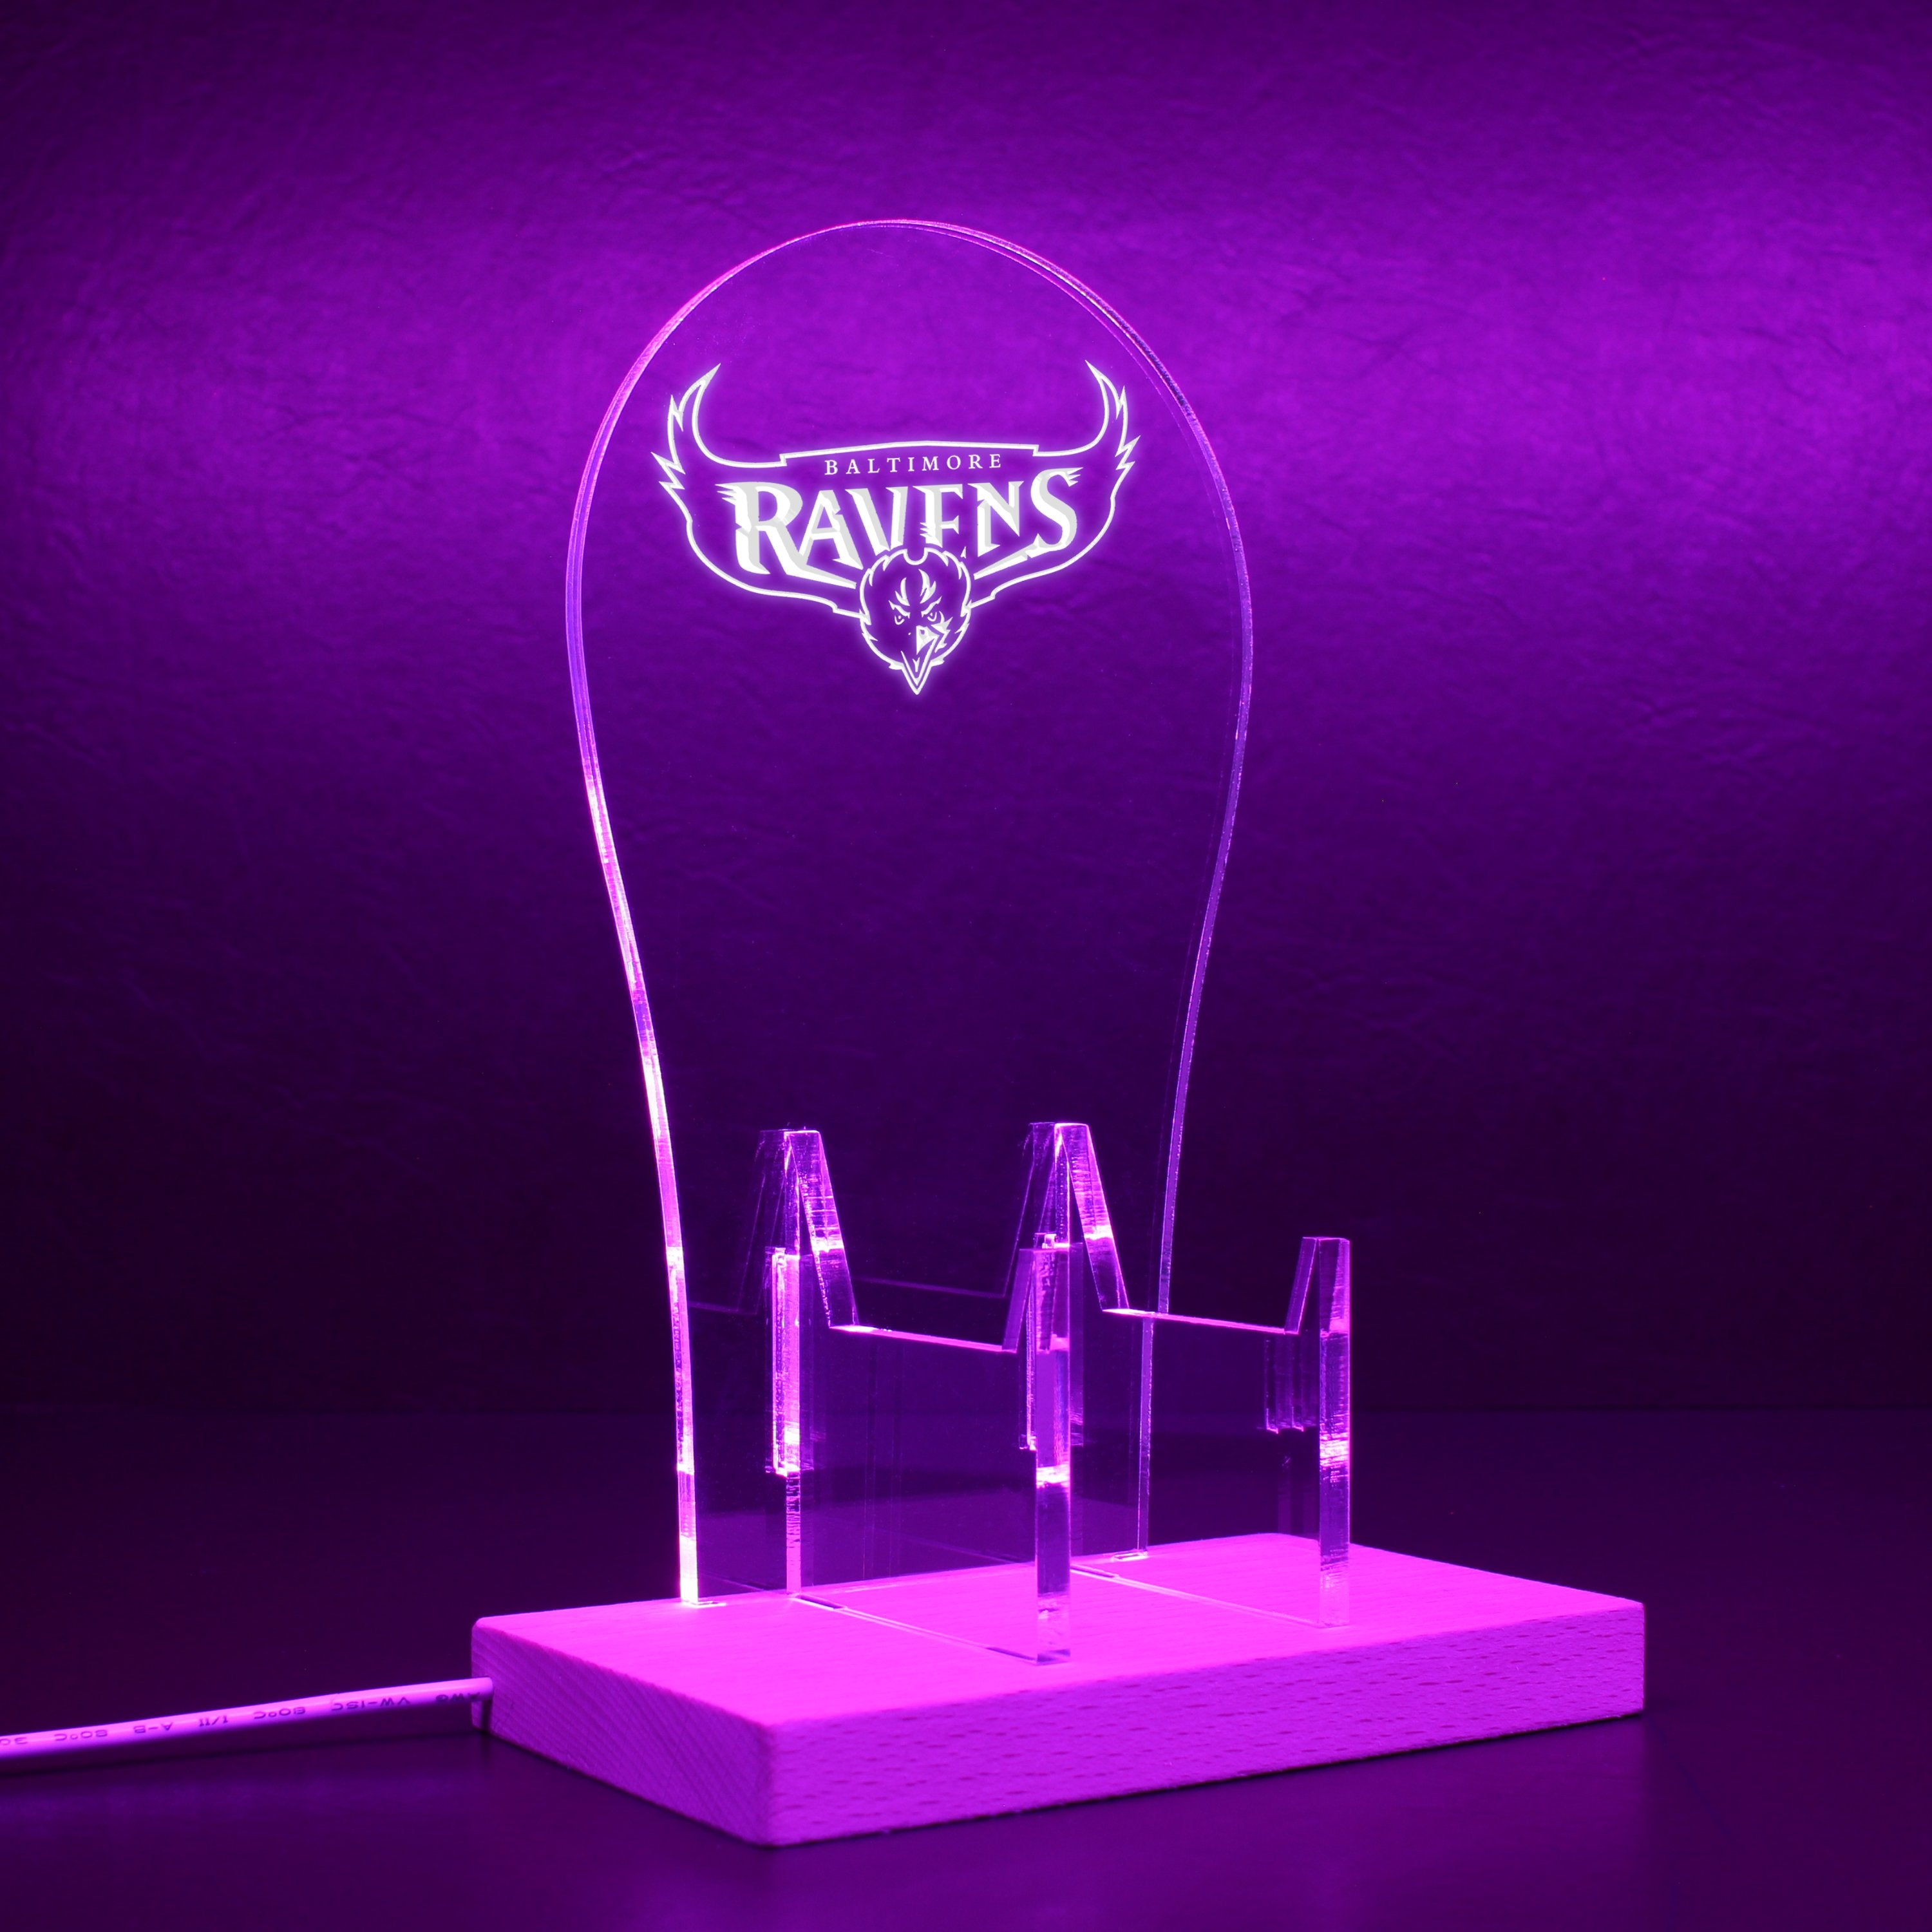 Baltimore Ravens Script Logo In Use From 1996-1998 RGB LED Gaming Headset Controller Stand